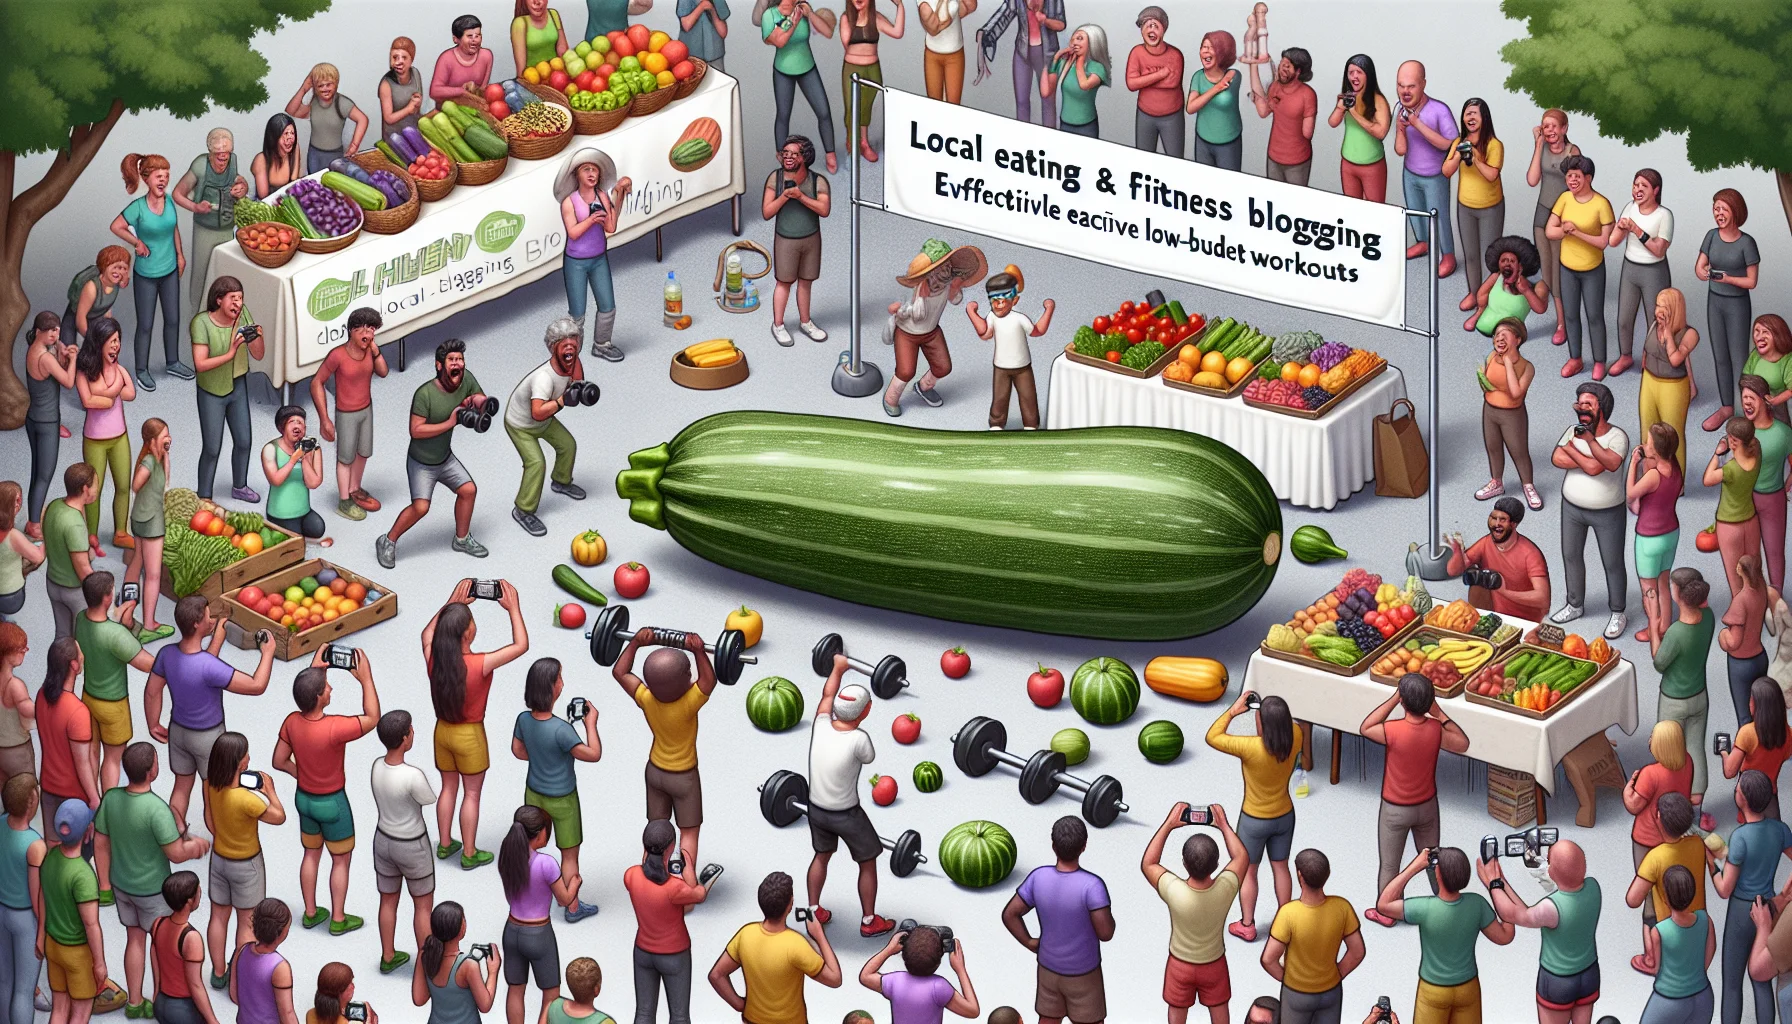 Create a highly detailed and realistic image of a funny and entertaining scene representing a local eating and fitness blogging event. Imagine different booths, each offering a wide variety of fresh, colorful fruits and vegetables, and fitness instructors demonstrating effective low-budget workouts. Include an amusing scene in the center, such as a person misinterpreting a zucchini for a weight, eagerly lifting it in the air. Add cheerful crowd comprising of multi-ethnic spectrum - Asian, African, Caucasian etc, of diverse genders observing, laughing, documenting and participating in the event. The overall vibe should be positive, promoting healthy living at a low cost.